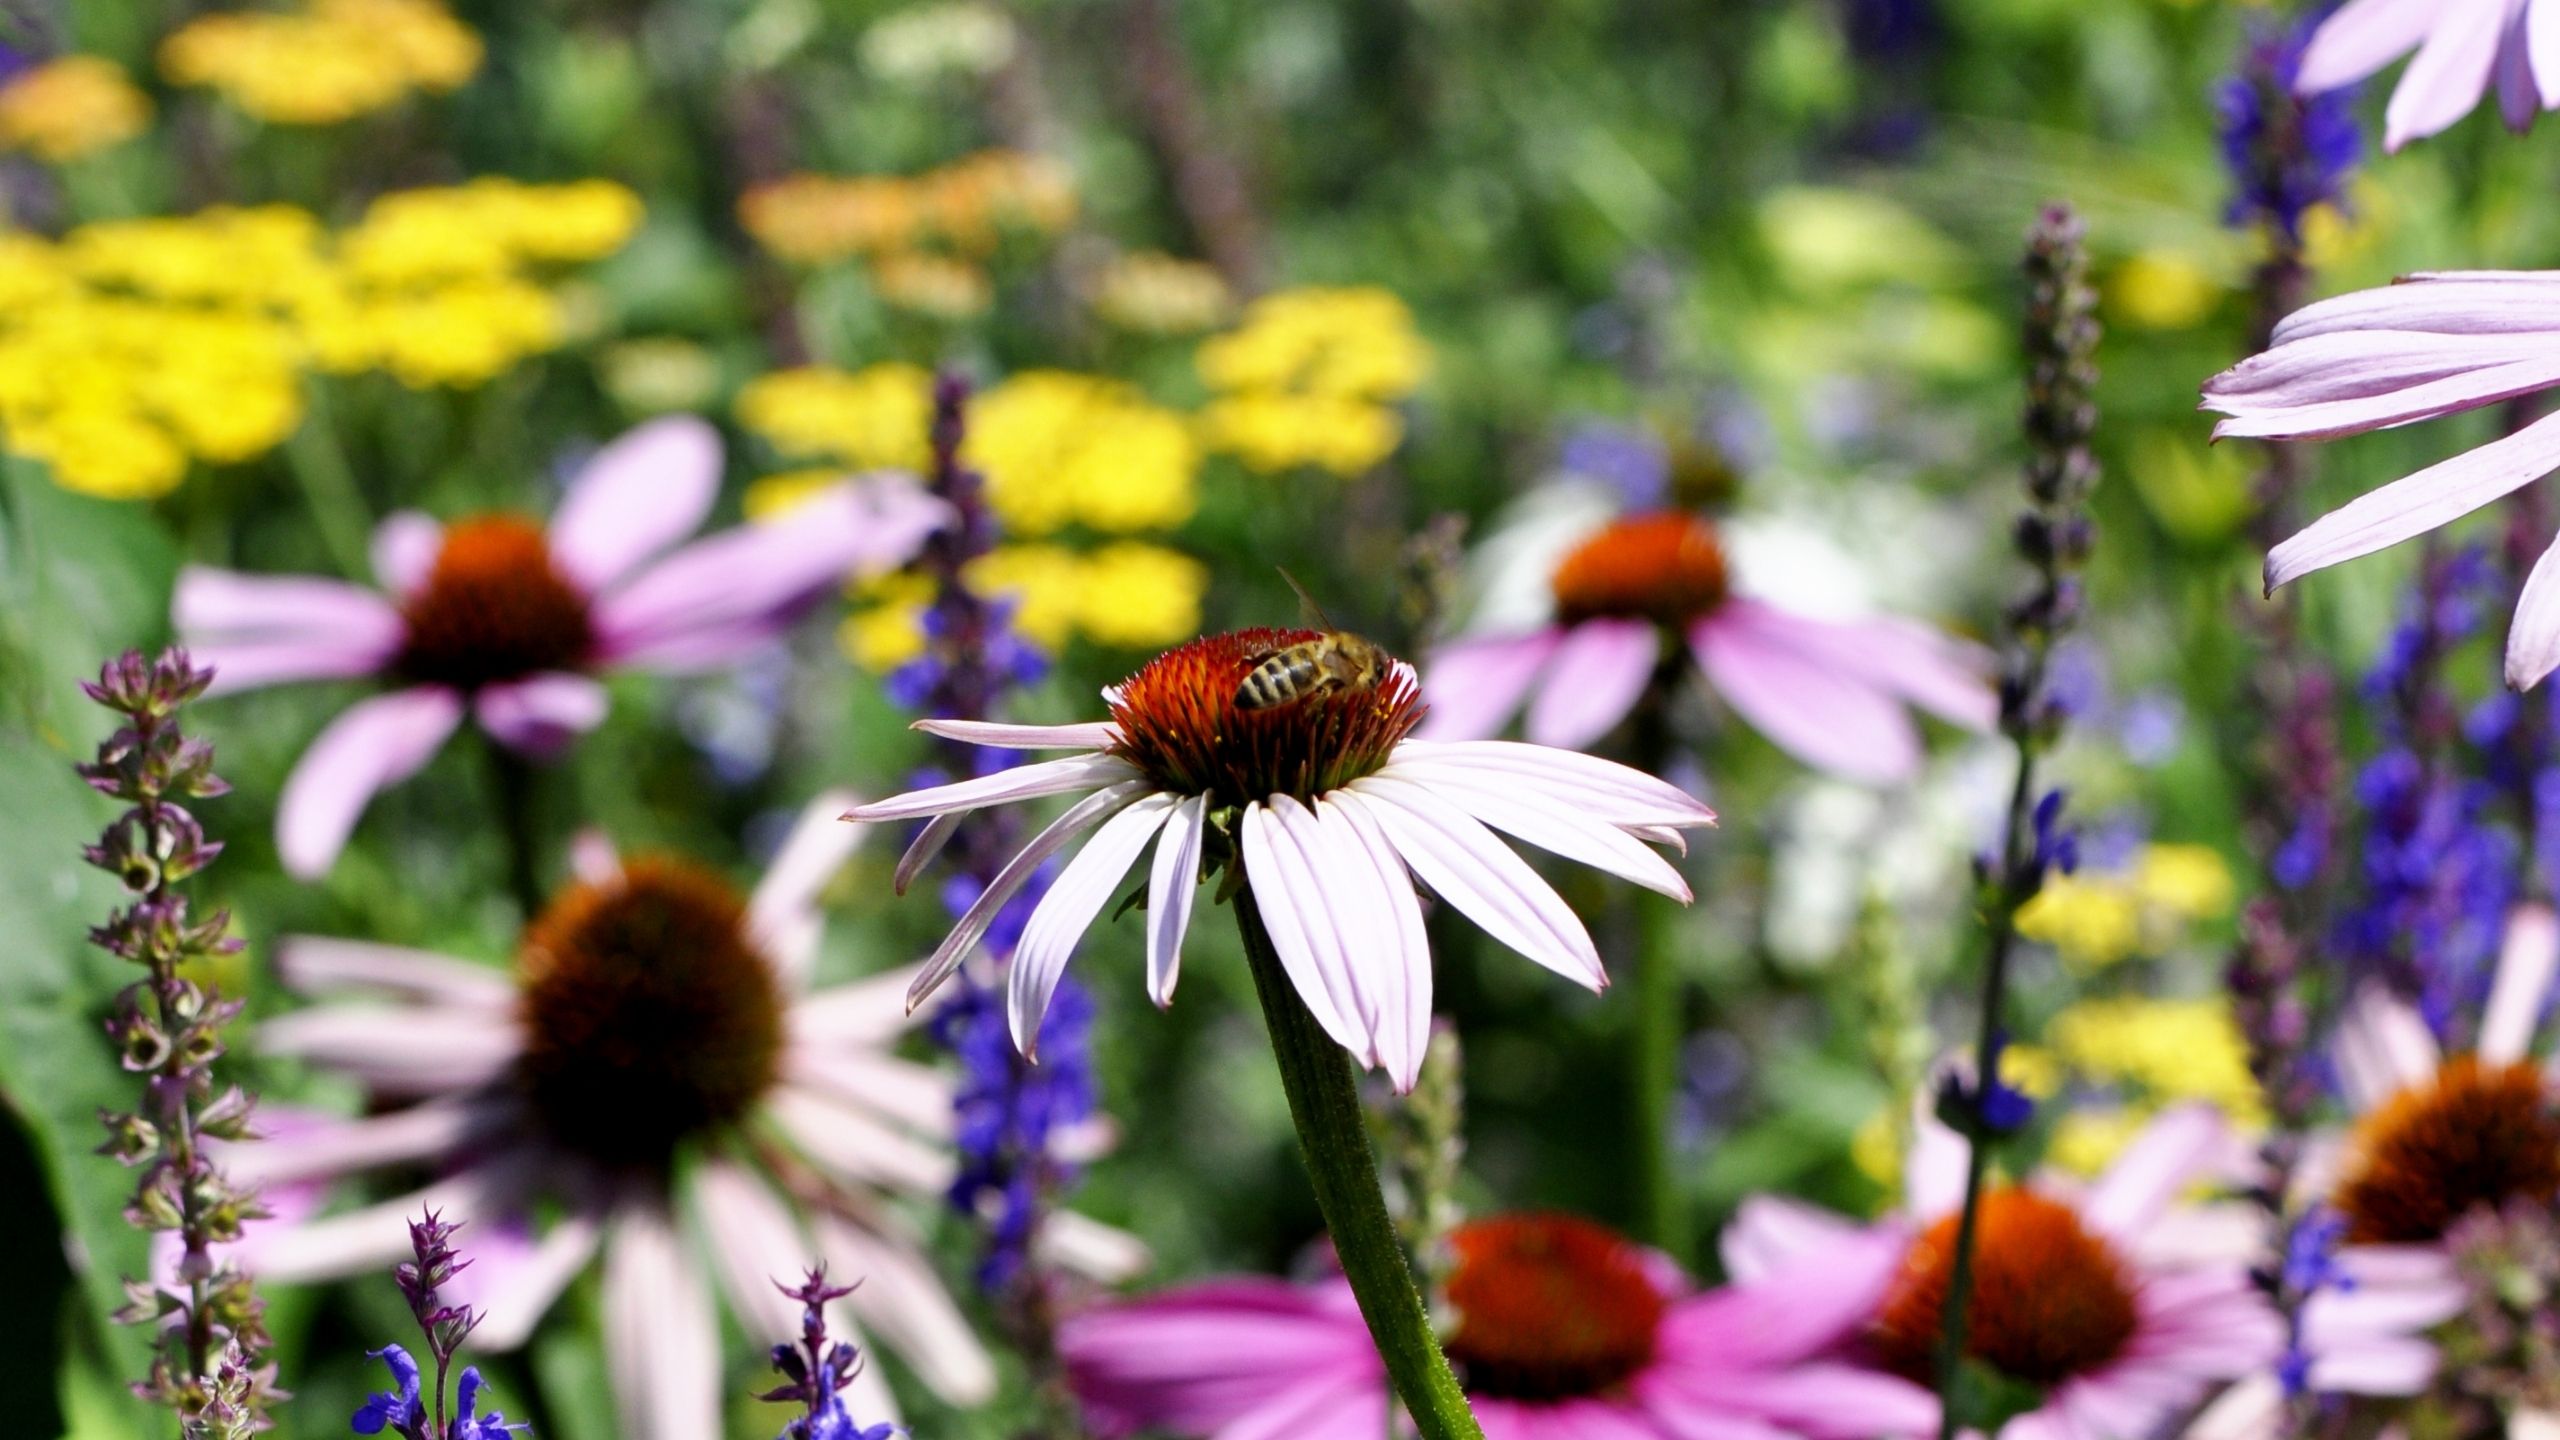 A native bee atop the flower head of a purple coneflower.